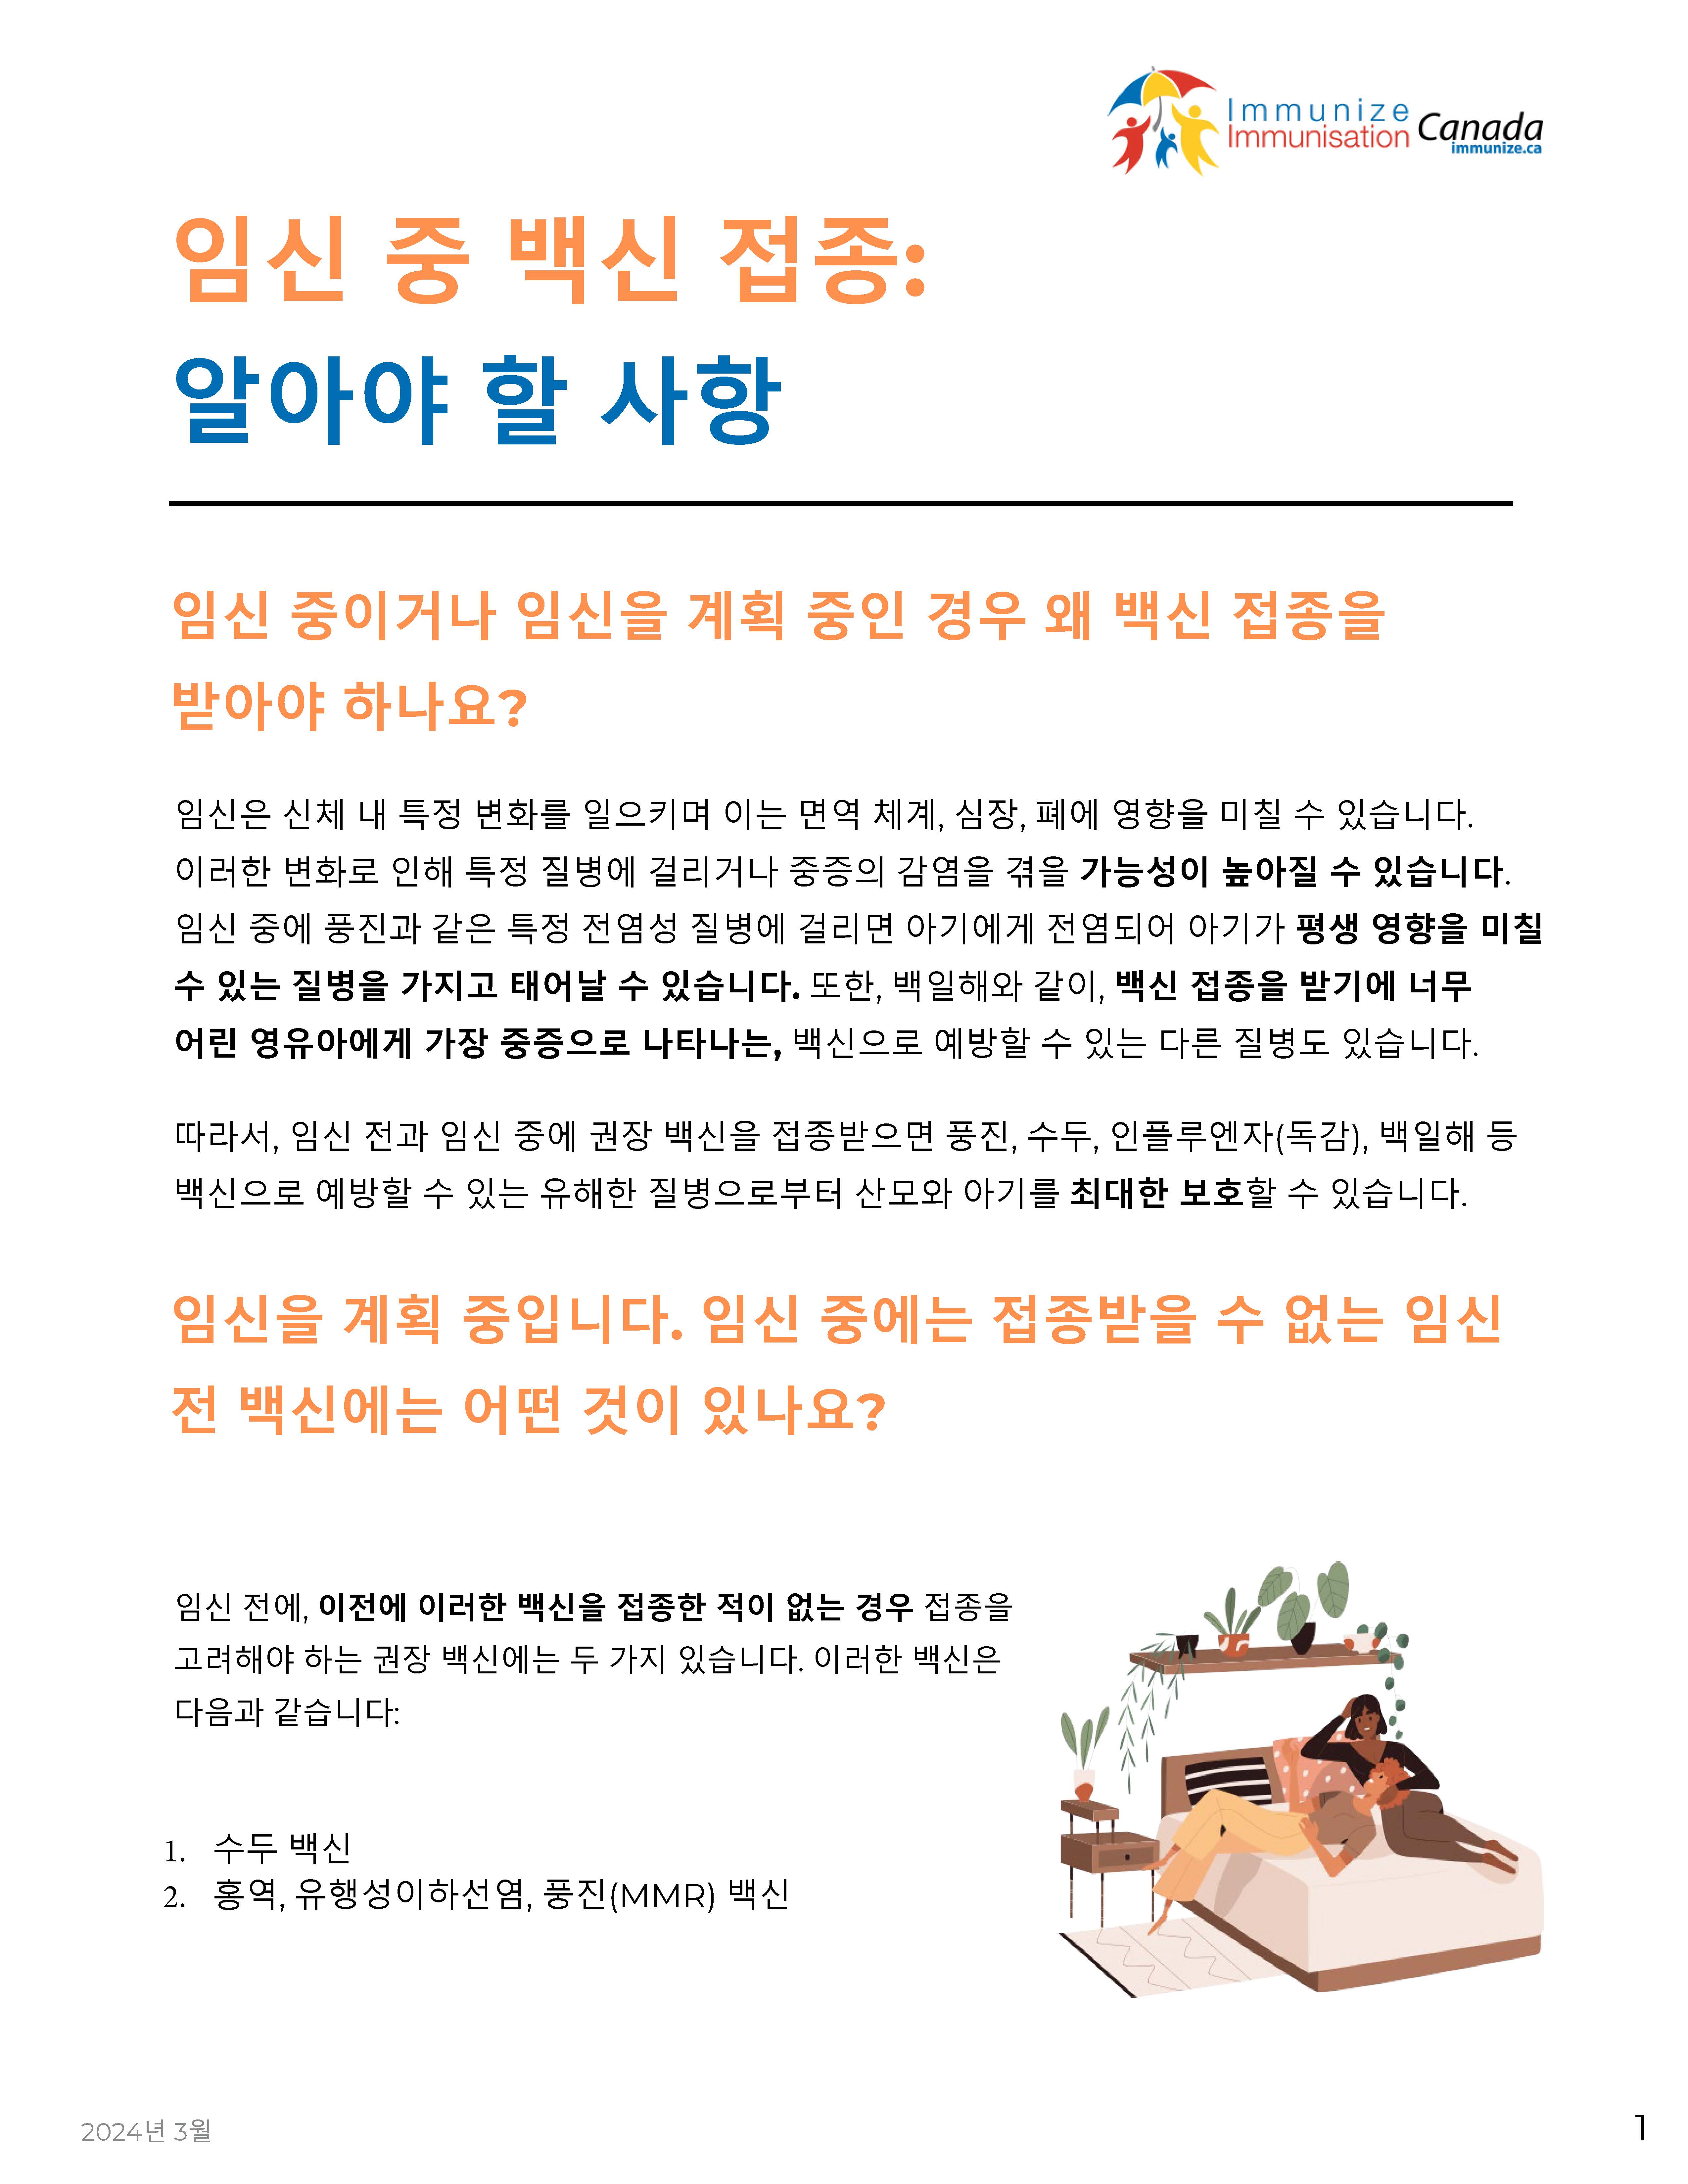 Vaccines in Pregnancy: What you need to know (factsheet in Korean)